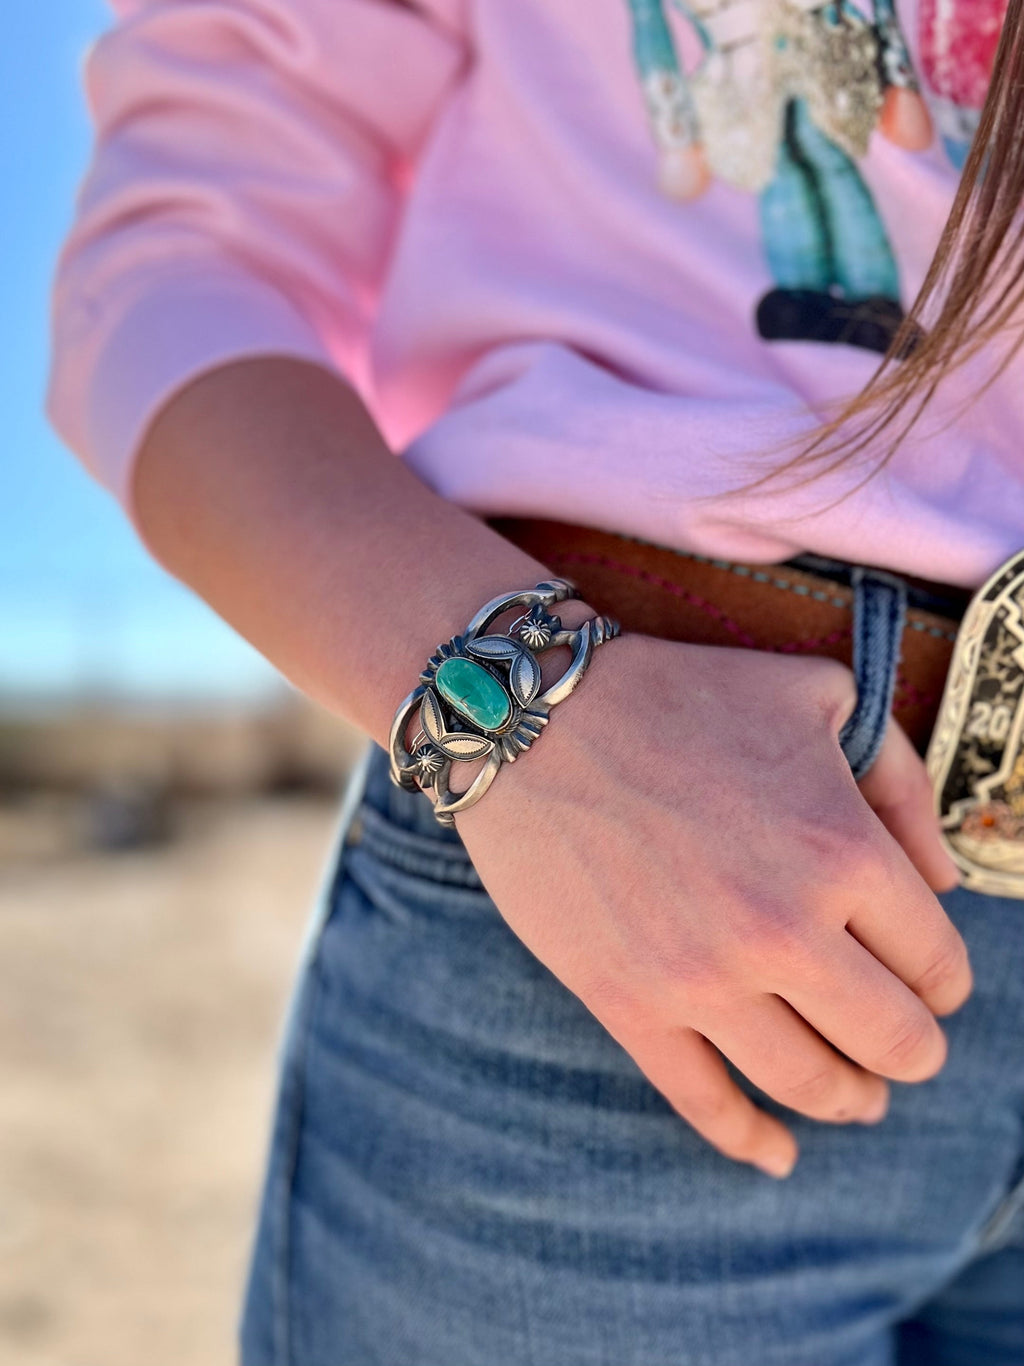 Bly Sterling Silver Navajo Turquoise Cuff Bracelet | gussieduponline